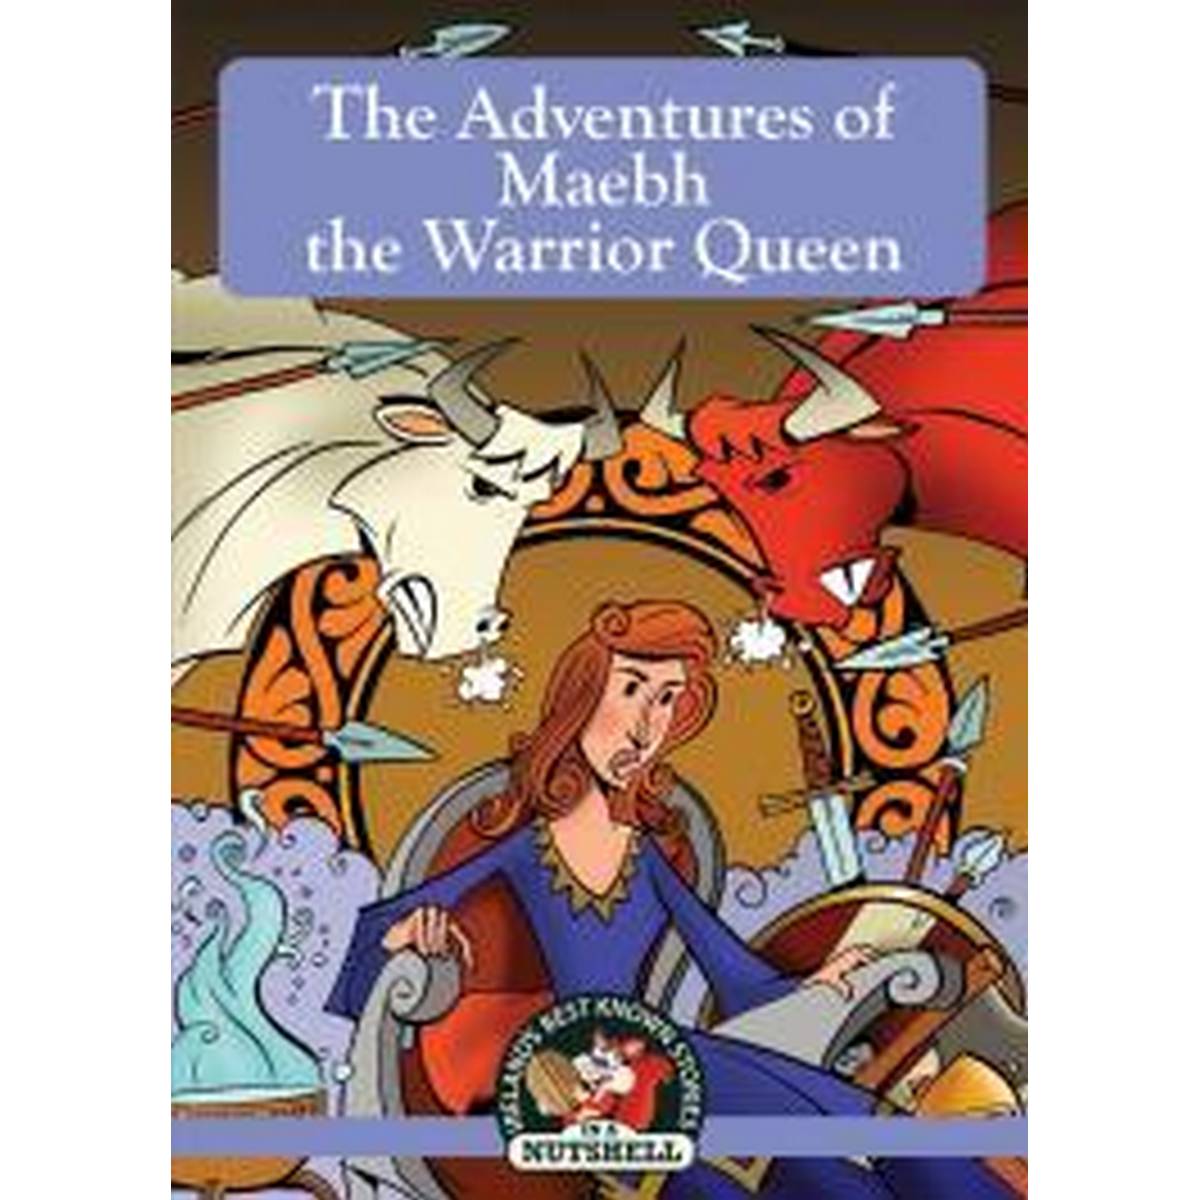 The Adventures of Maebh the Warrior Queen (In a Nutshell) 13